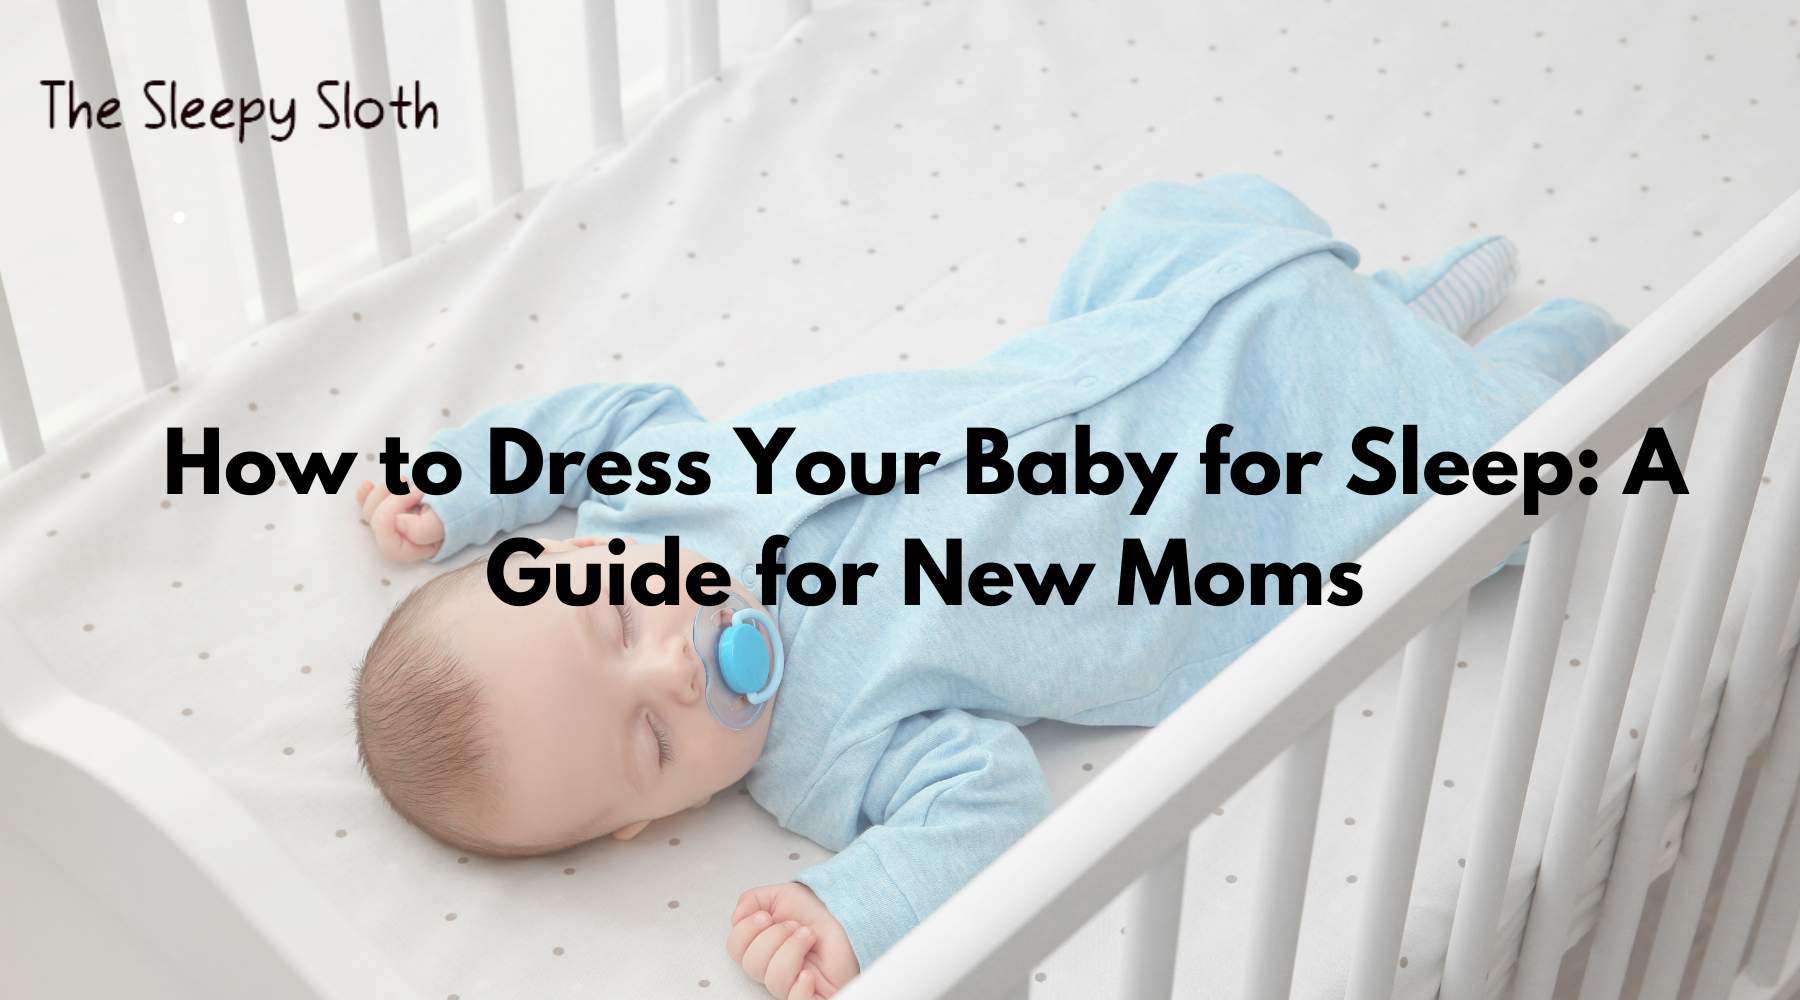 How to Dress Your Baby for Sleep: A Guide for New Moms - The Sleepy Sloth